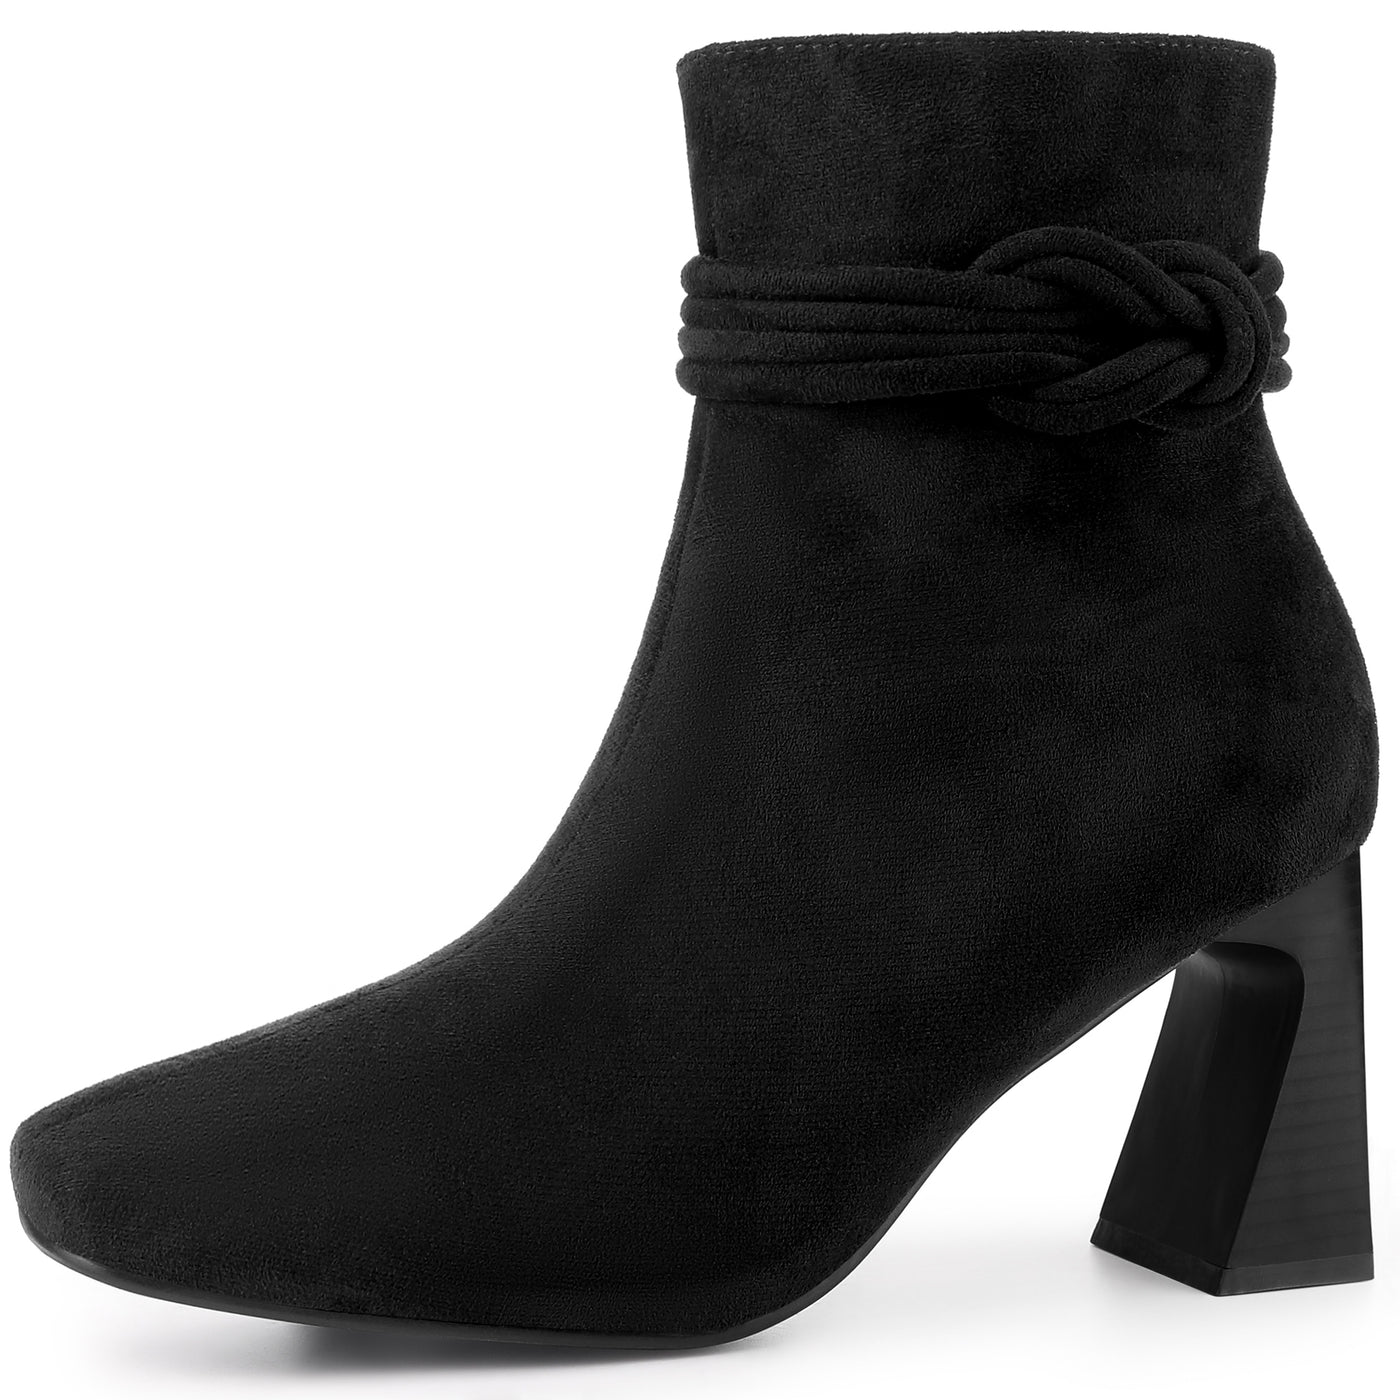 Allegra K Knot Decor Square Toe Side Zip Chunky Heel Ankle Boots